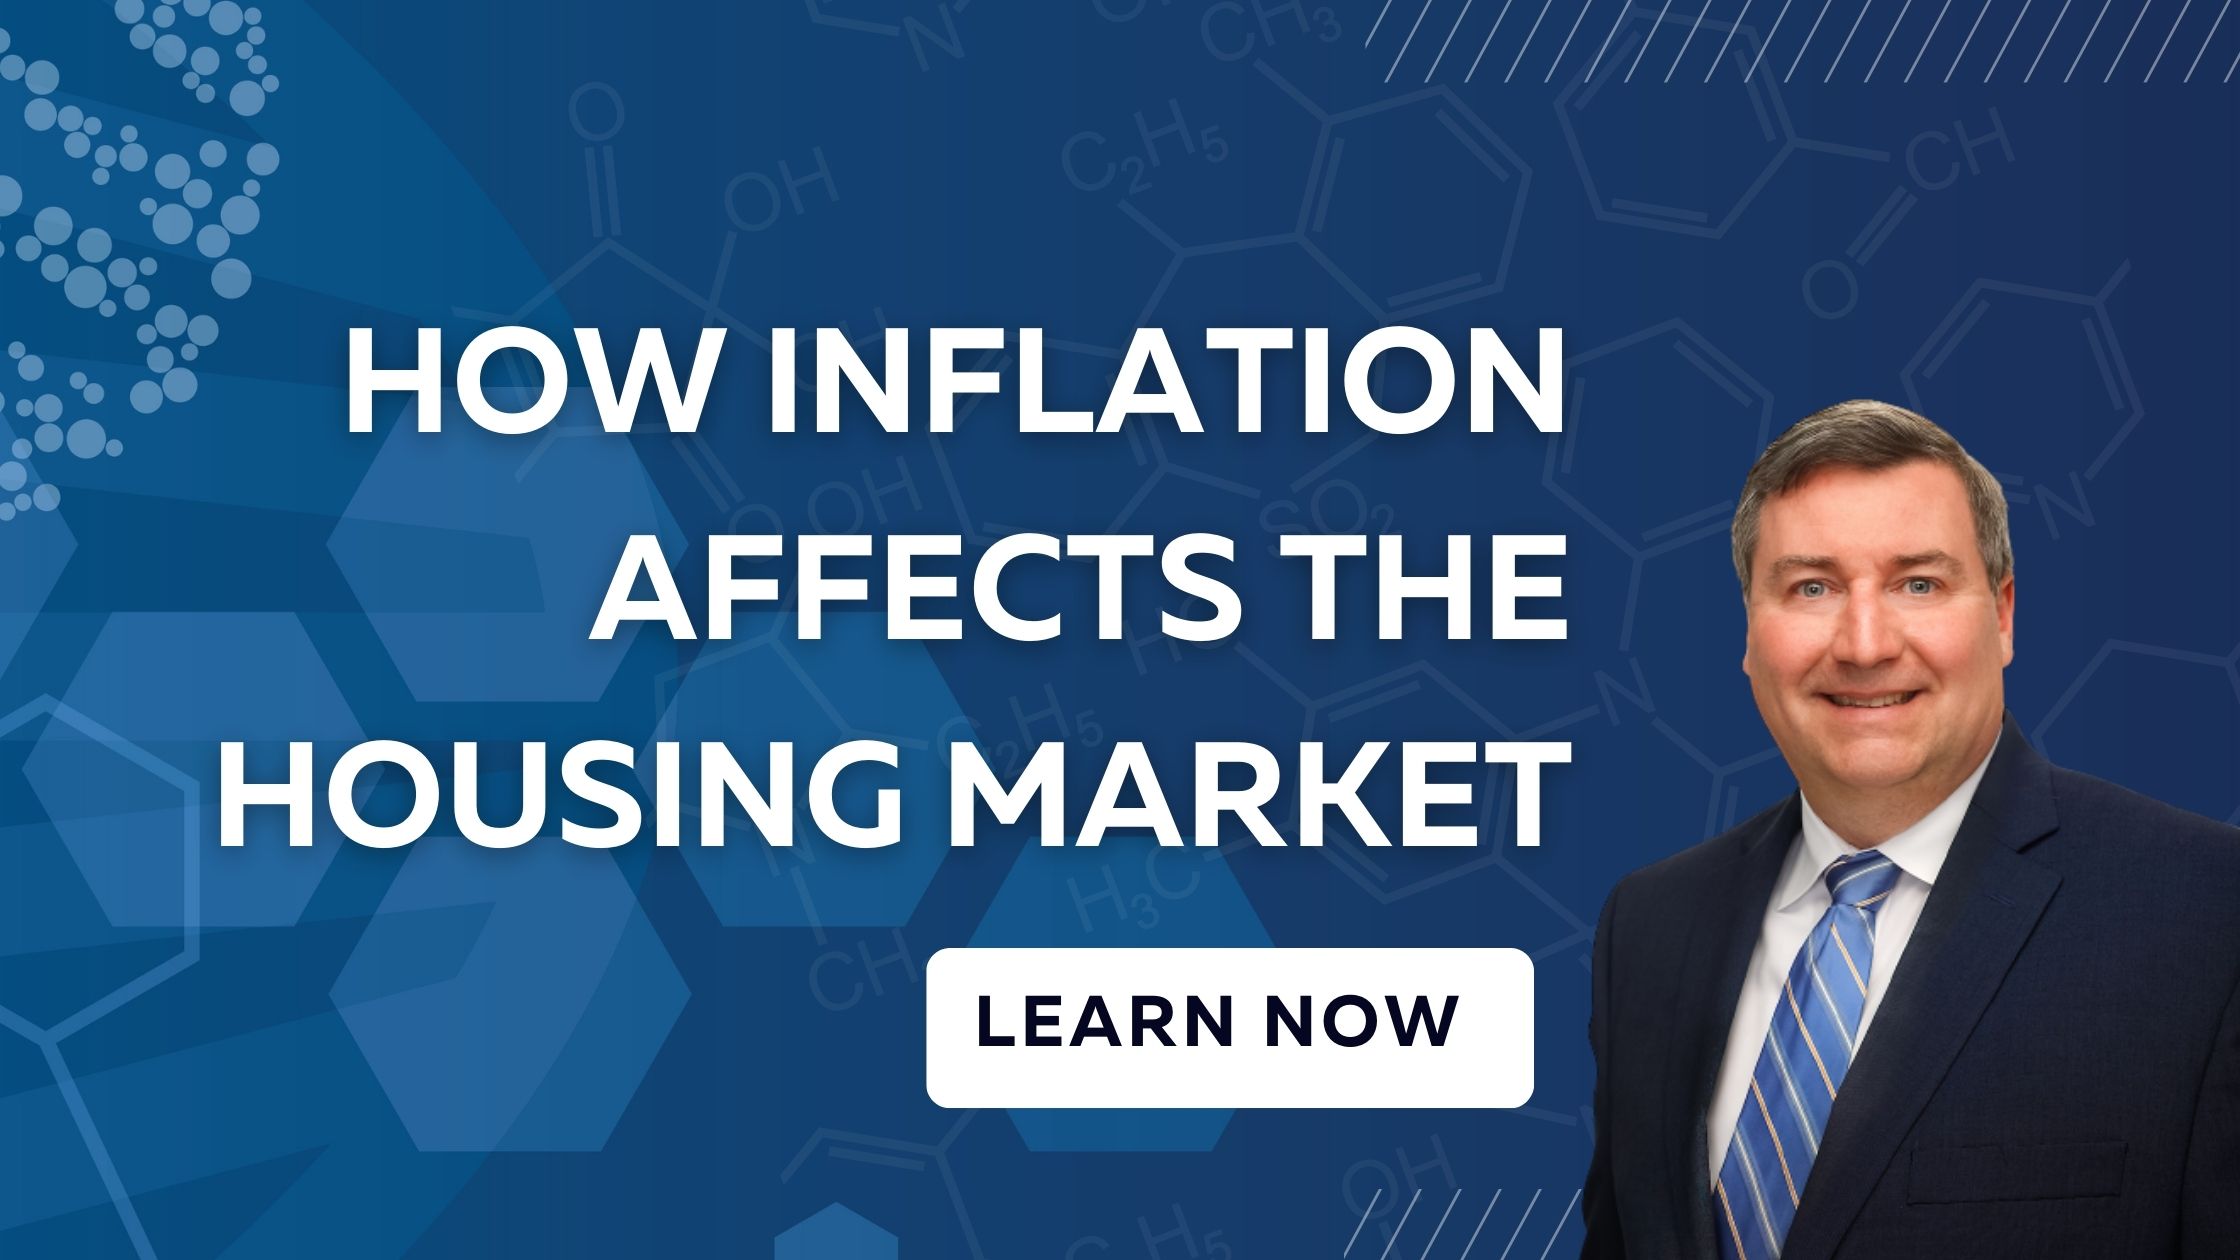 How_Inflation_Affects_Housing_by_Realtor_Michael_Mahoney_Boston.jpg